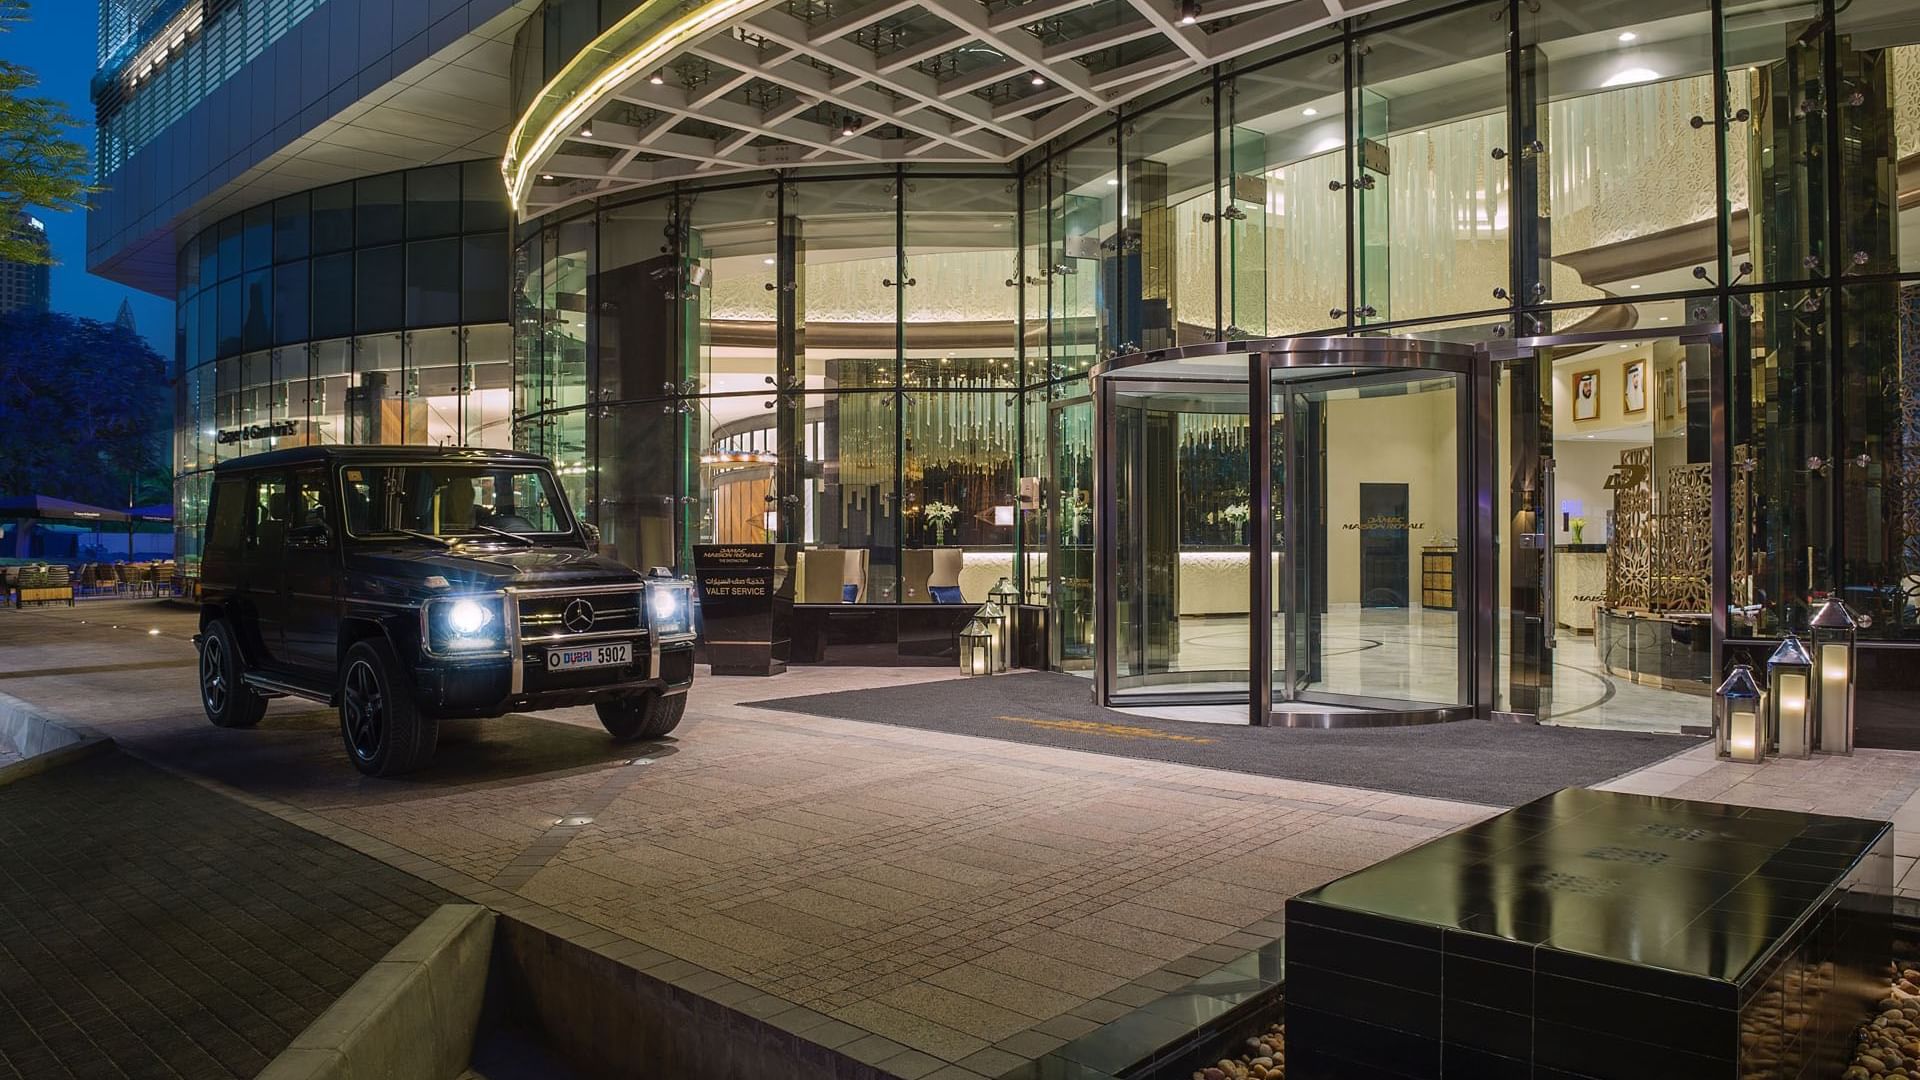 A jeep parked in front of the DAMAC Maison Distinction hotel at night